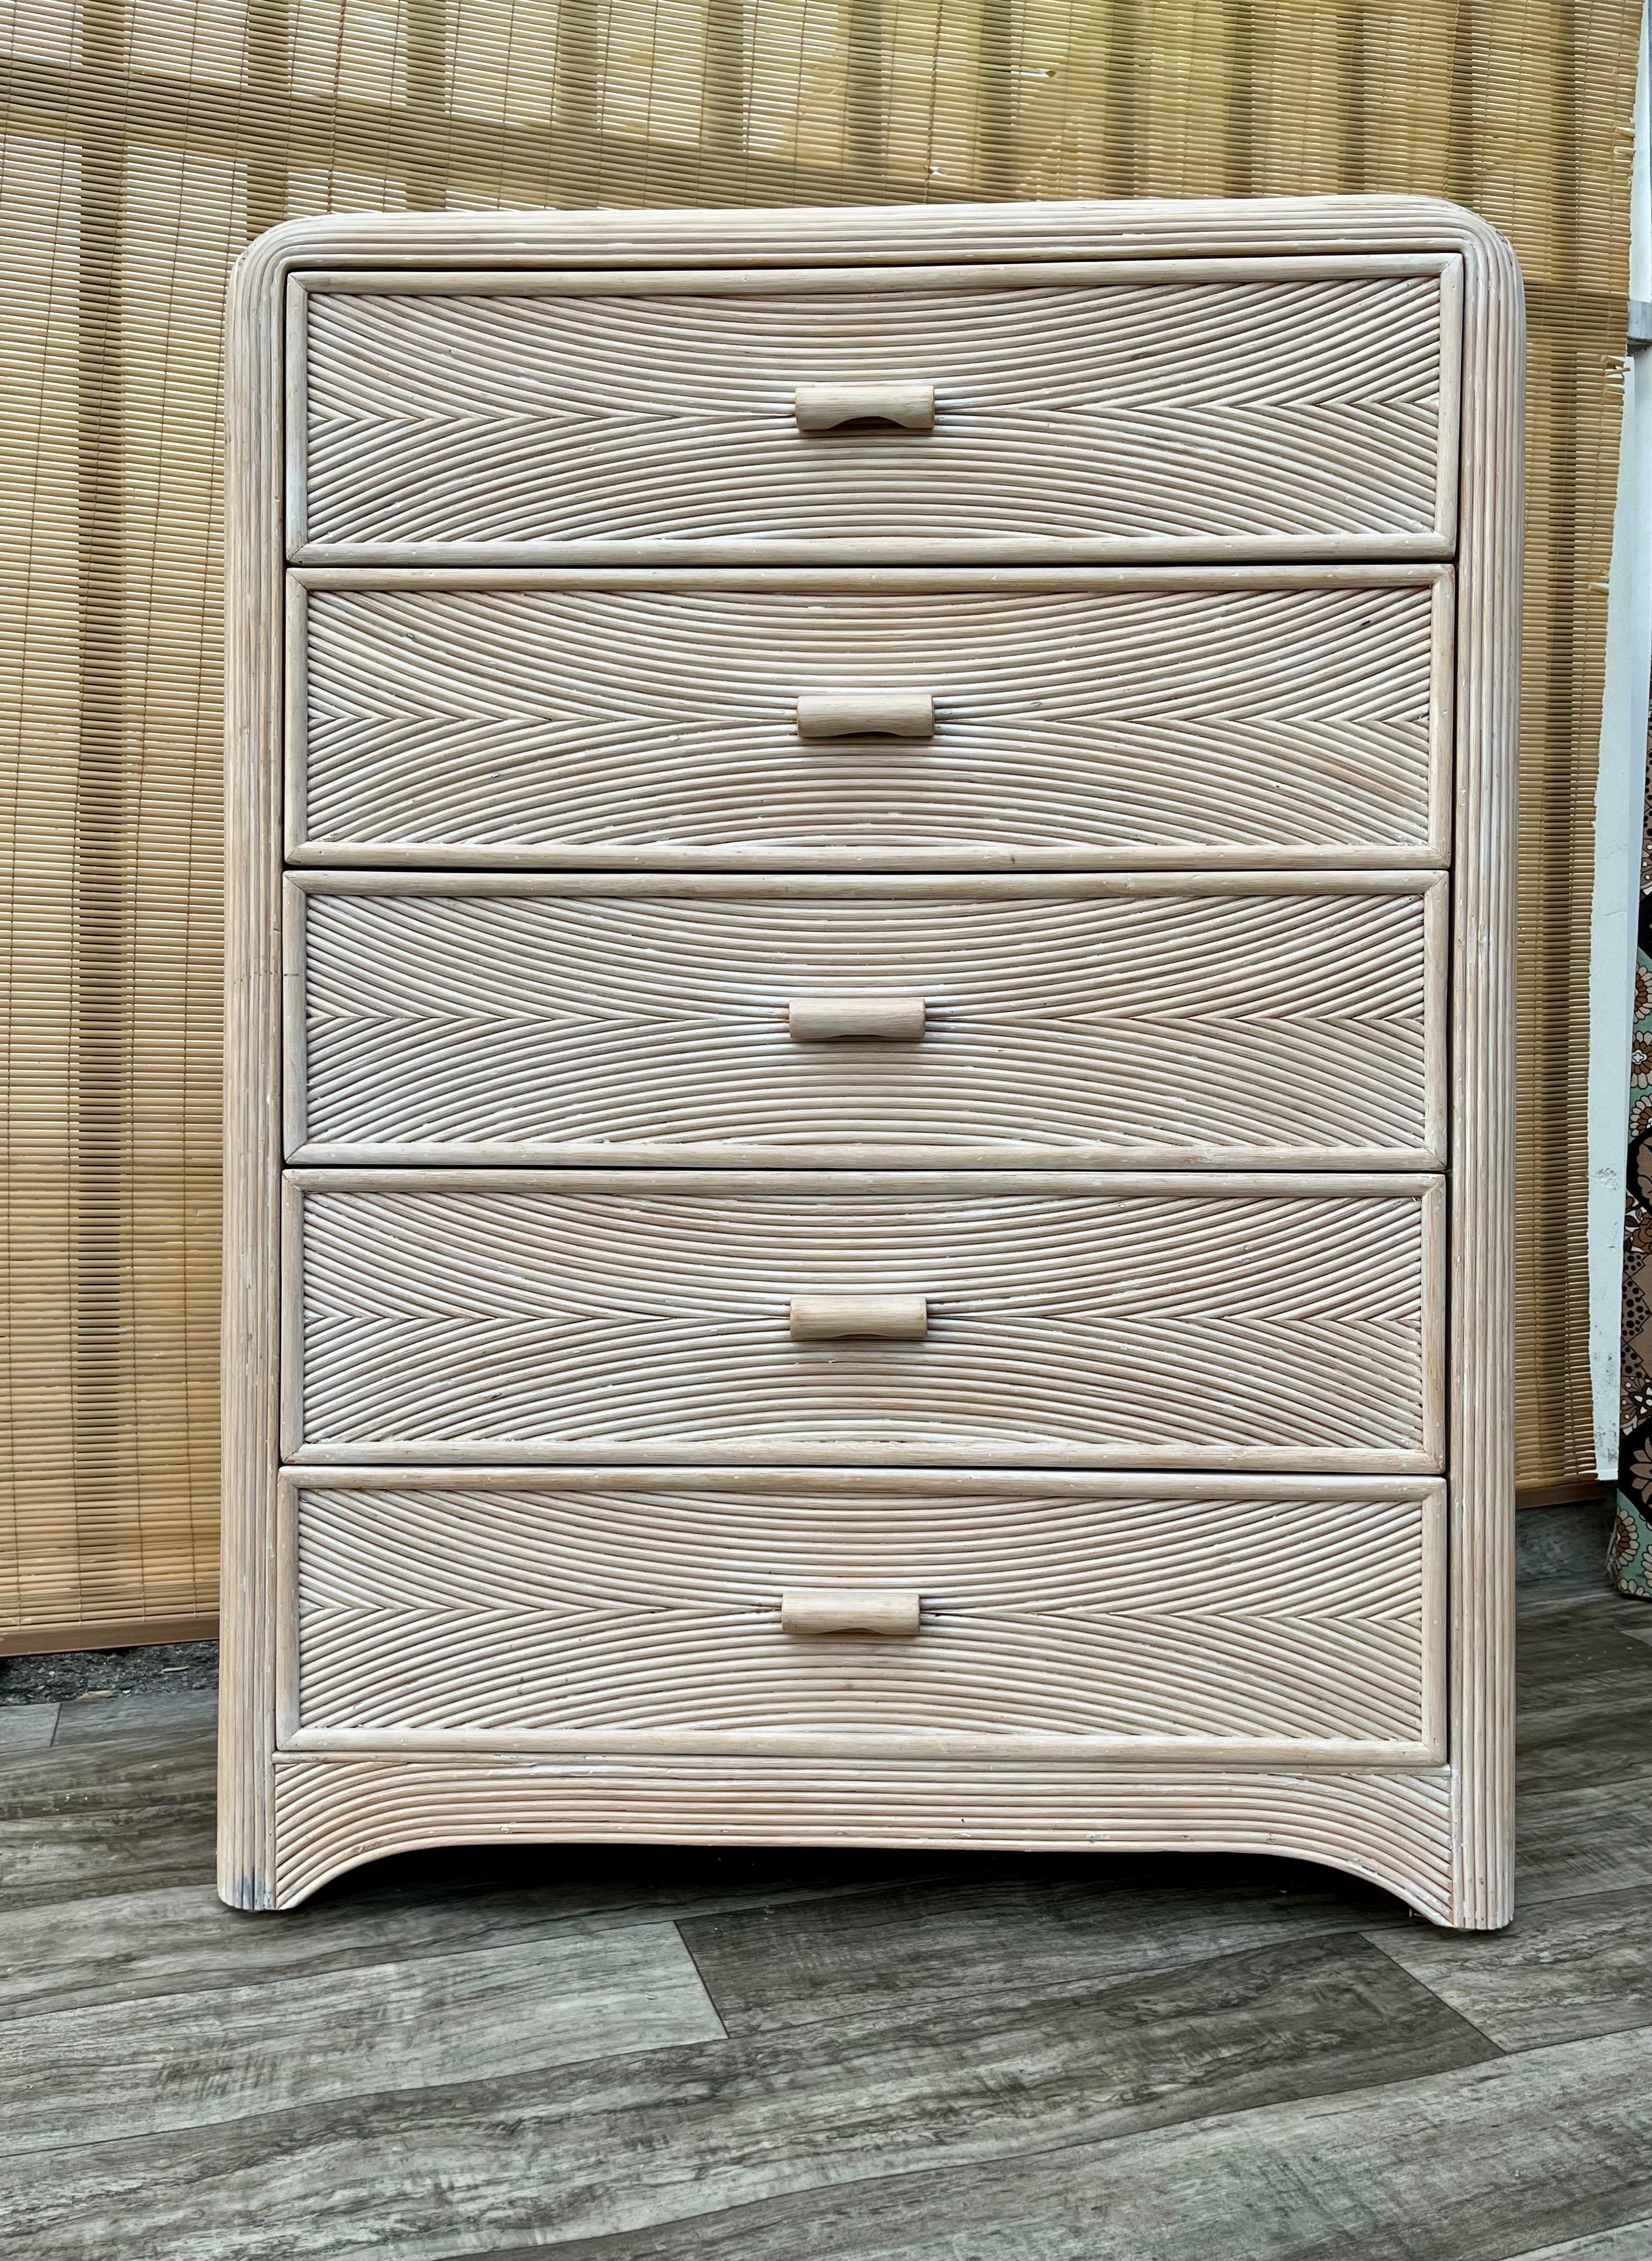 Coastal Style Pencil Reed Highboy Dresser. circa 1980s
Features a chic rattan and split pencil reed swirl pattern design with rounded corners in a beautiful soft cream color with 5 drawers that offer plenty of storage space.
In good original